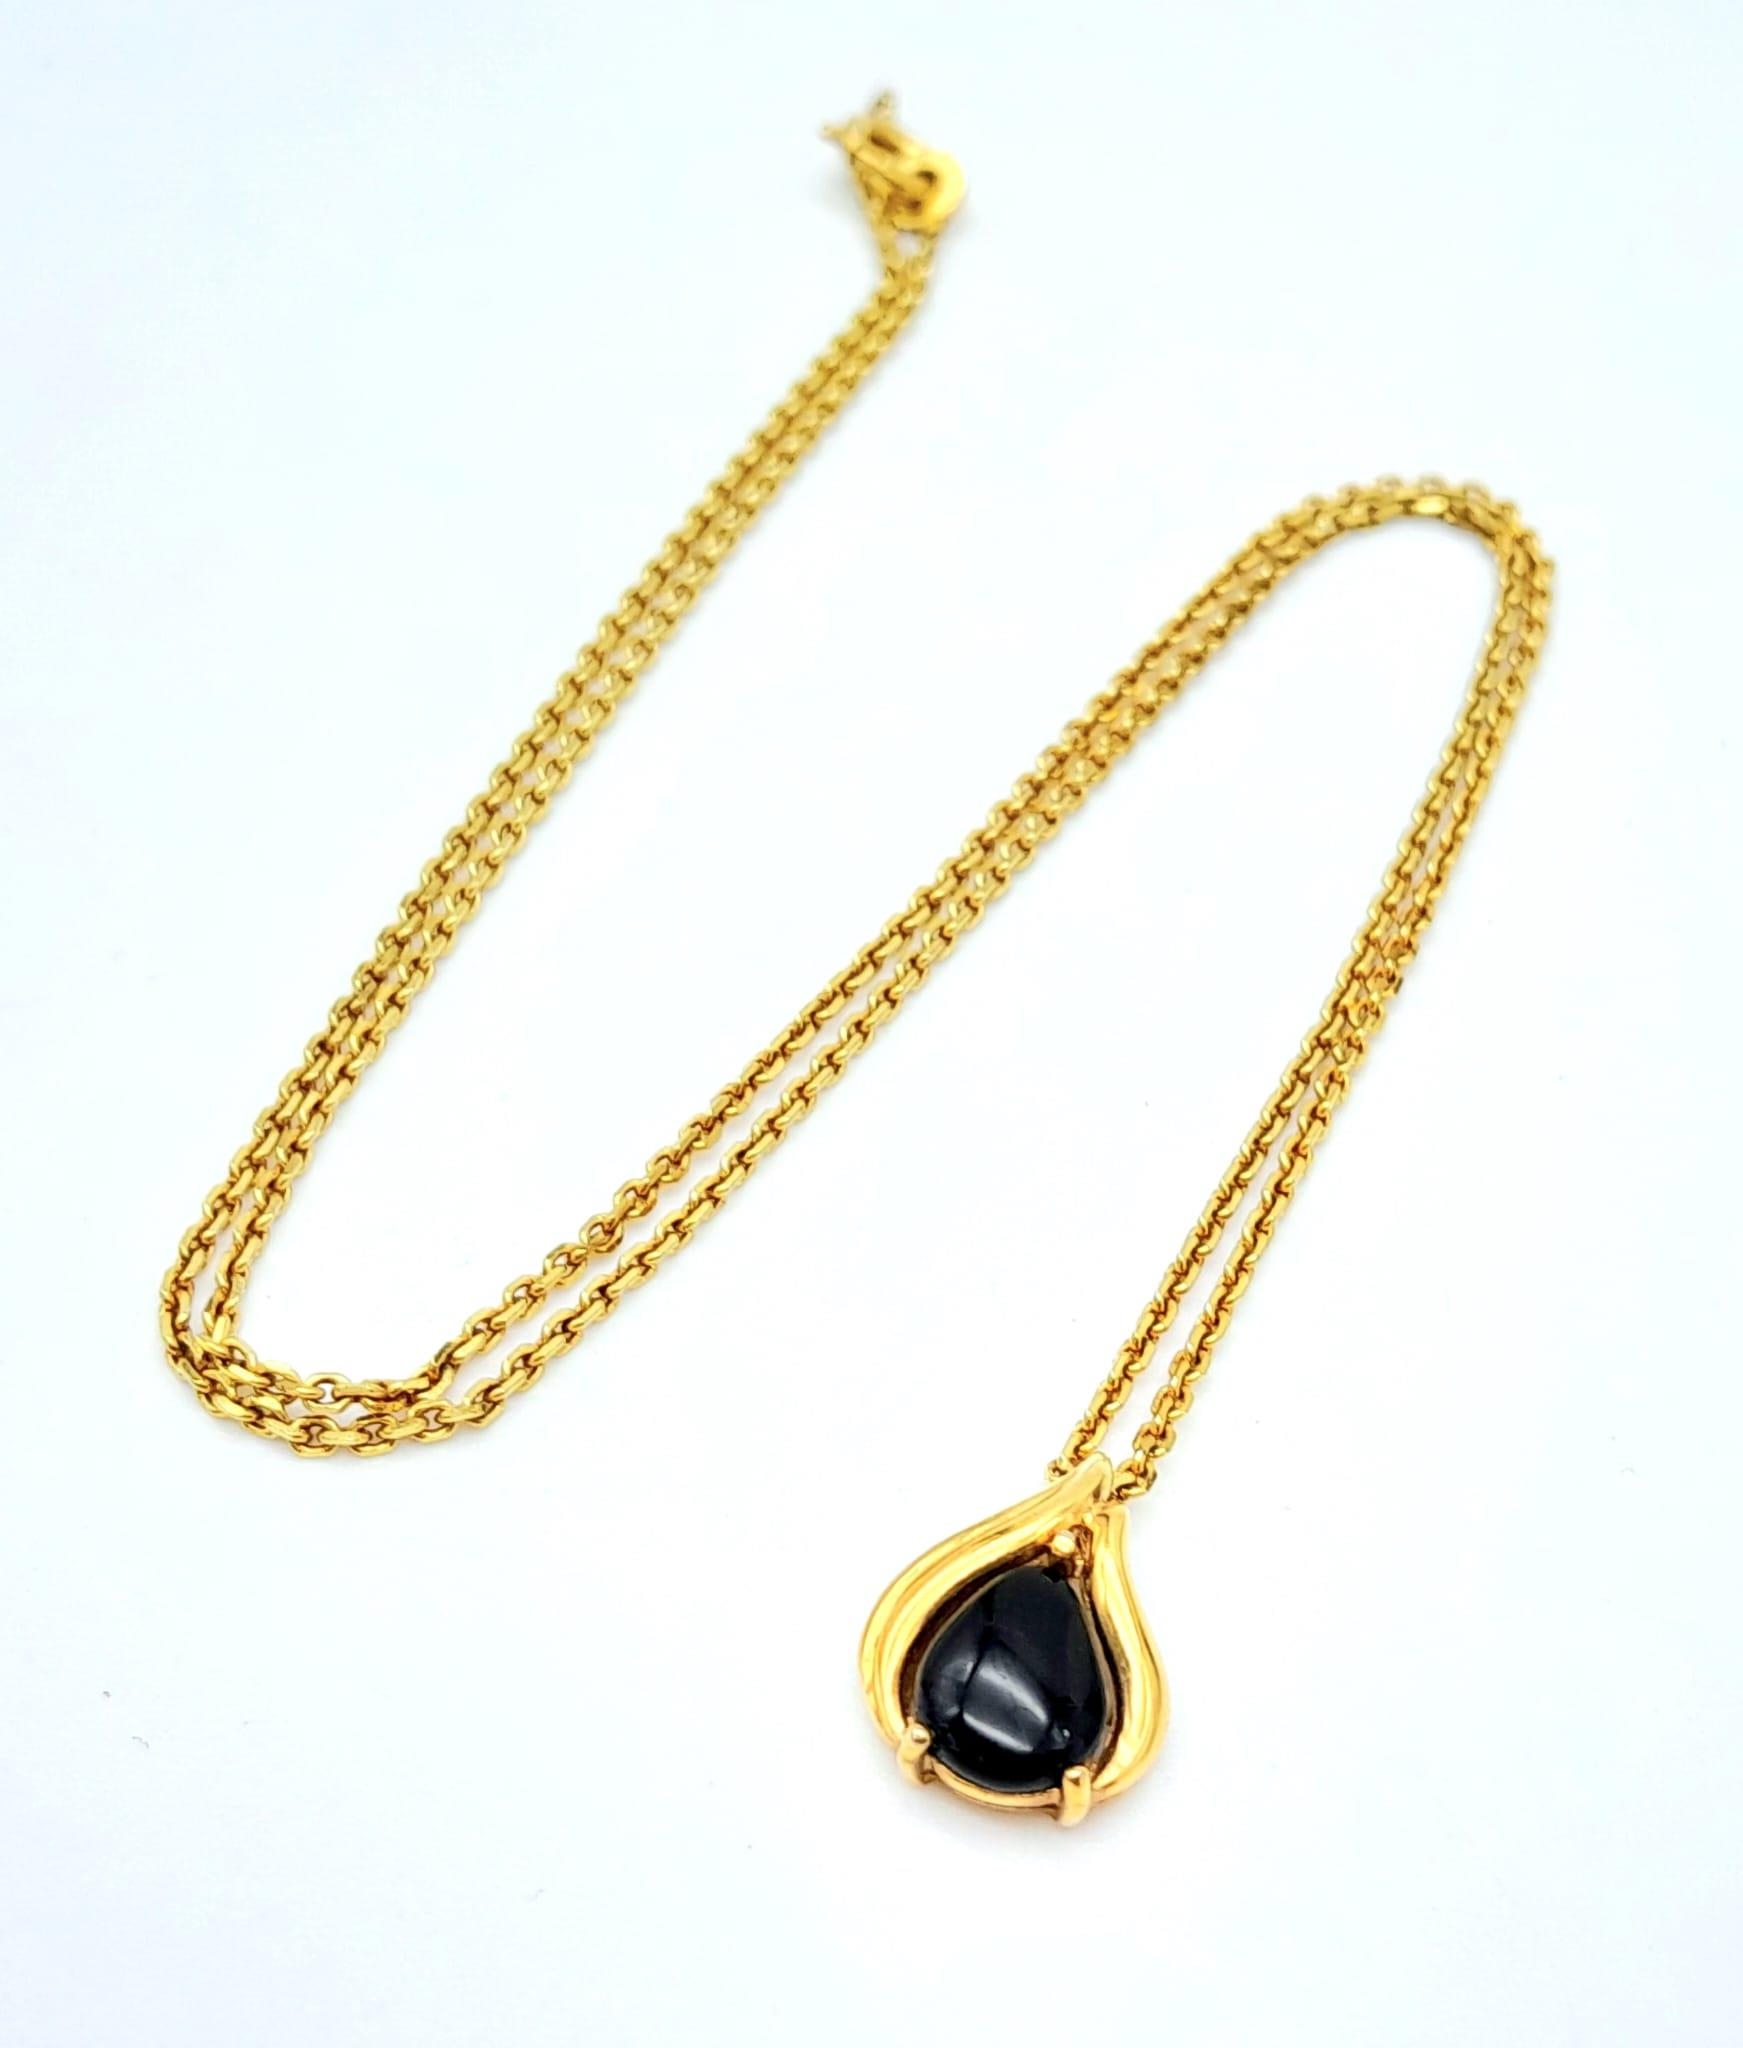 A 9 K yellow gold chain necklace with a black onyx pendant, chain length: 40 cm, total weight: 2.5 - Image 3 of 4